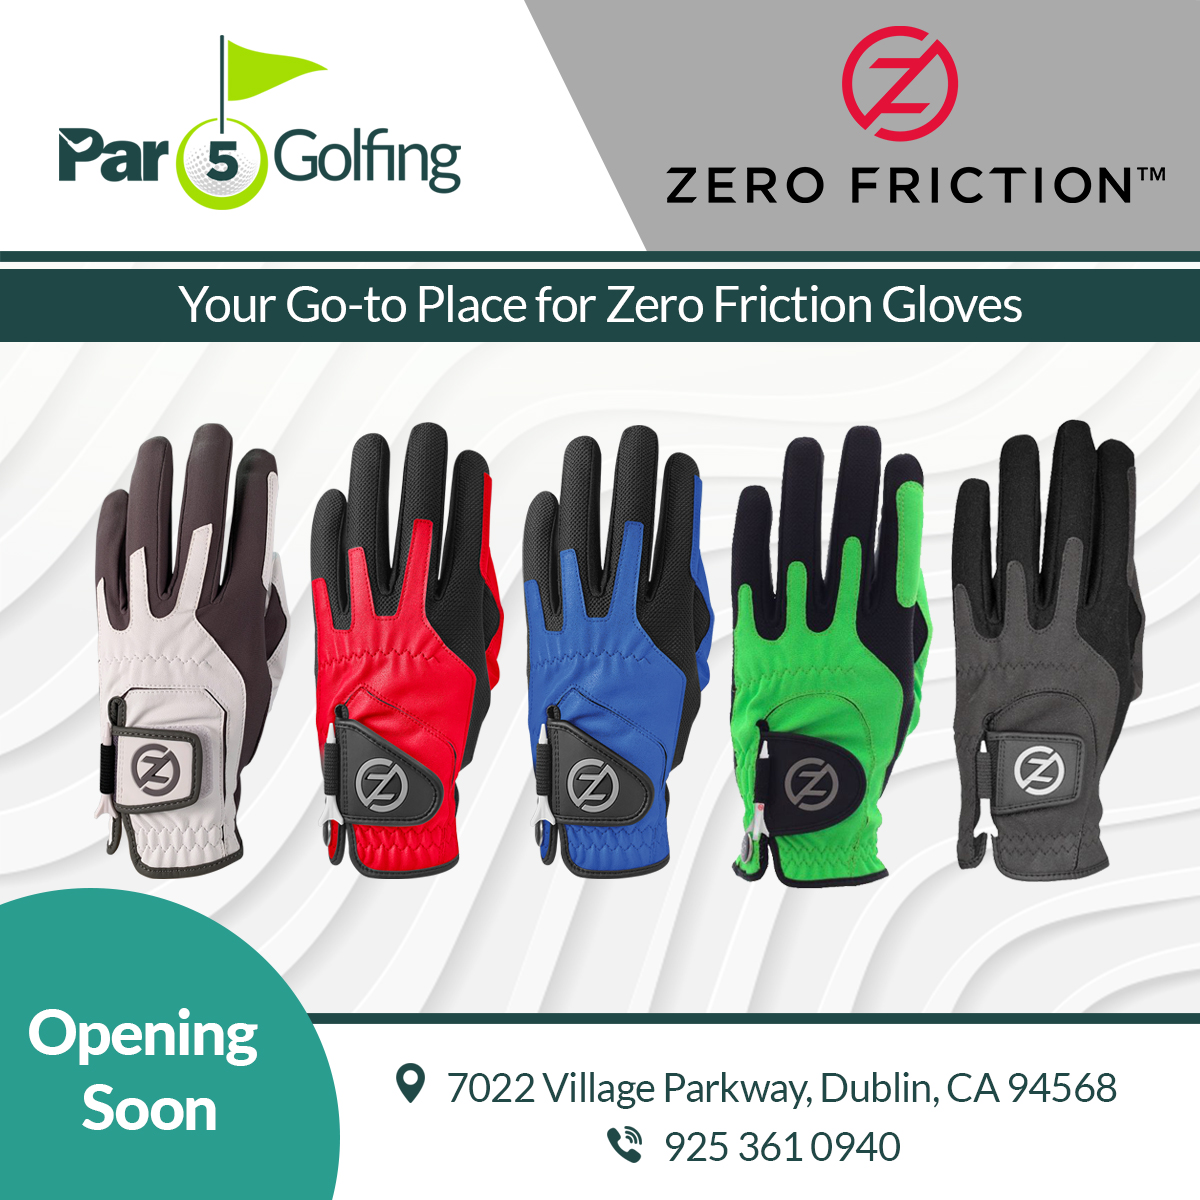 #Par5Golfing is going to be your primary go-to shop for #ZeroFriction and other #golfgloves in Dublin, CA. Opening soon. Stay tuned! 

#golf #golfing #golfevent #golftravel #golfclub #golfpro #golfer #golffun #golftraining #golfstore #PGA #tour #masters